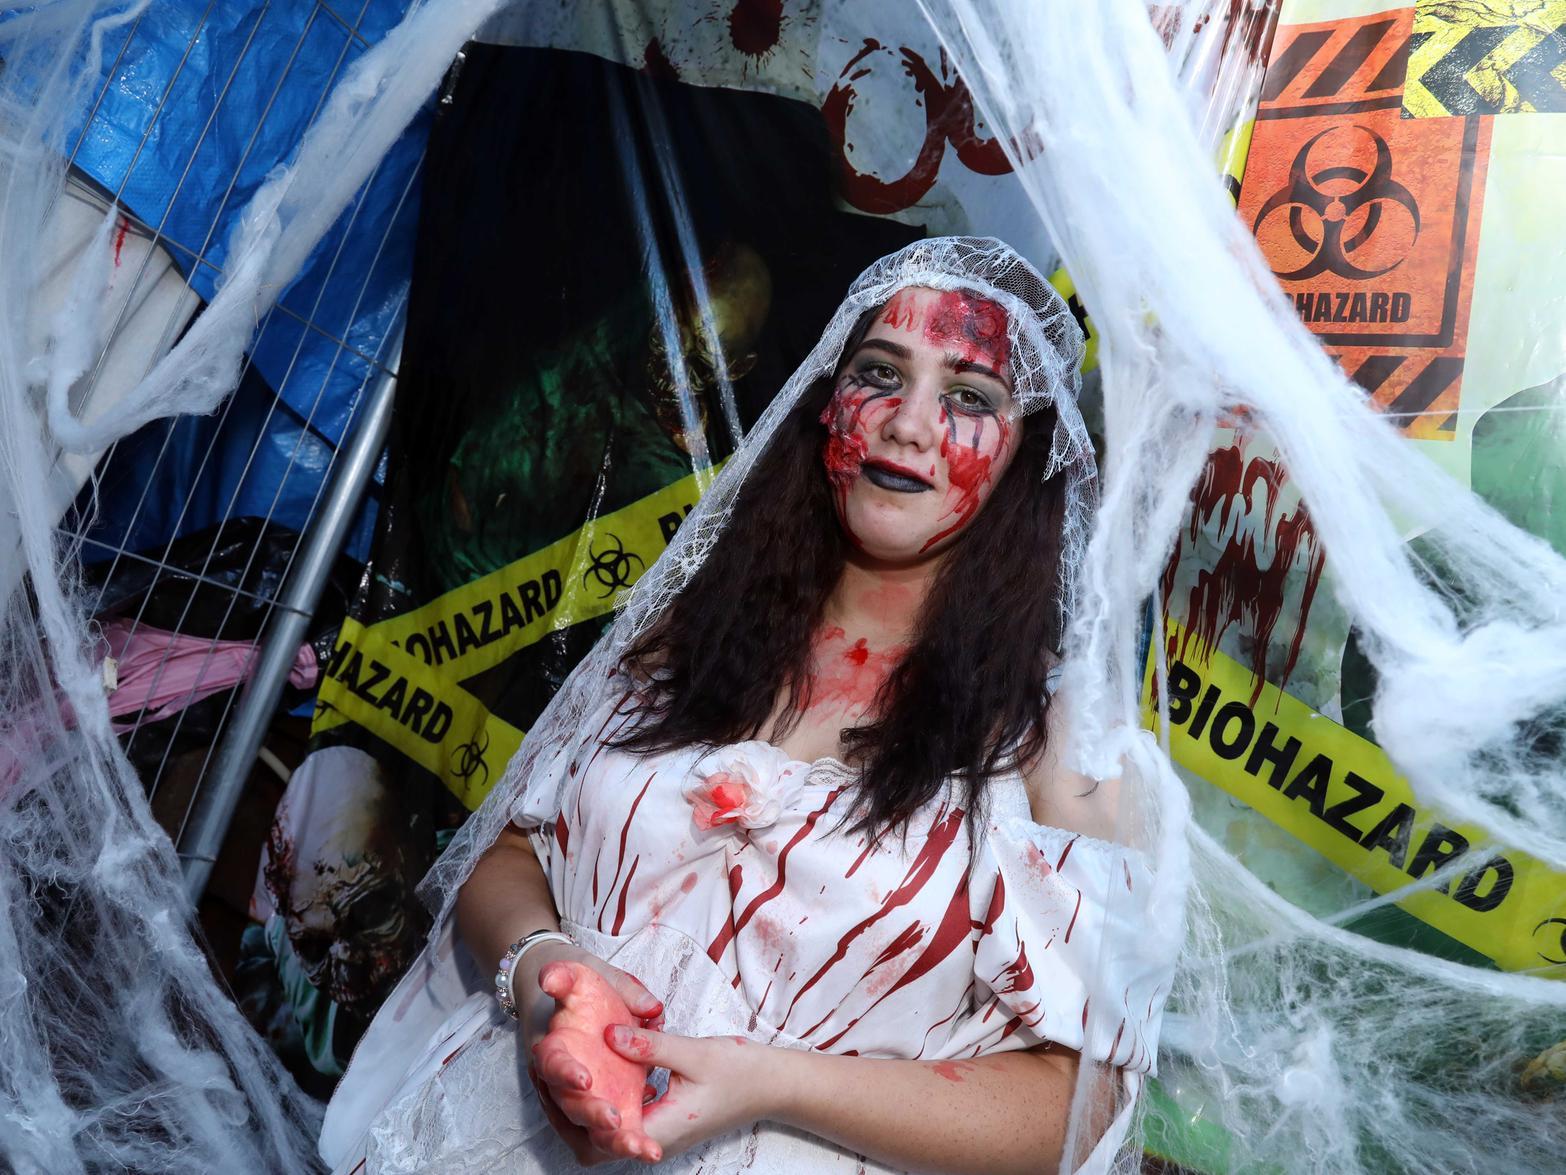 A zombie bride was another surprise from around a curtain!